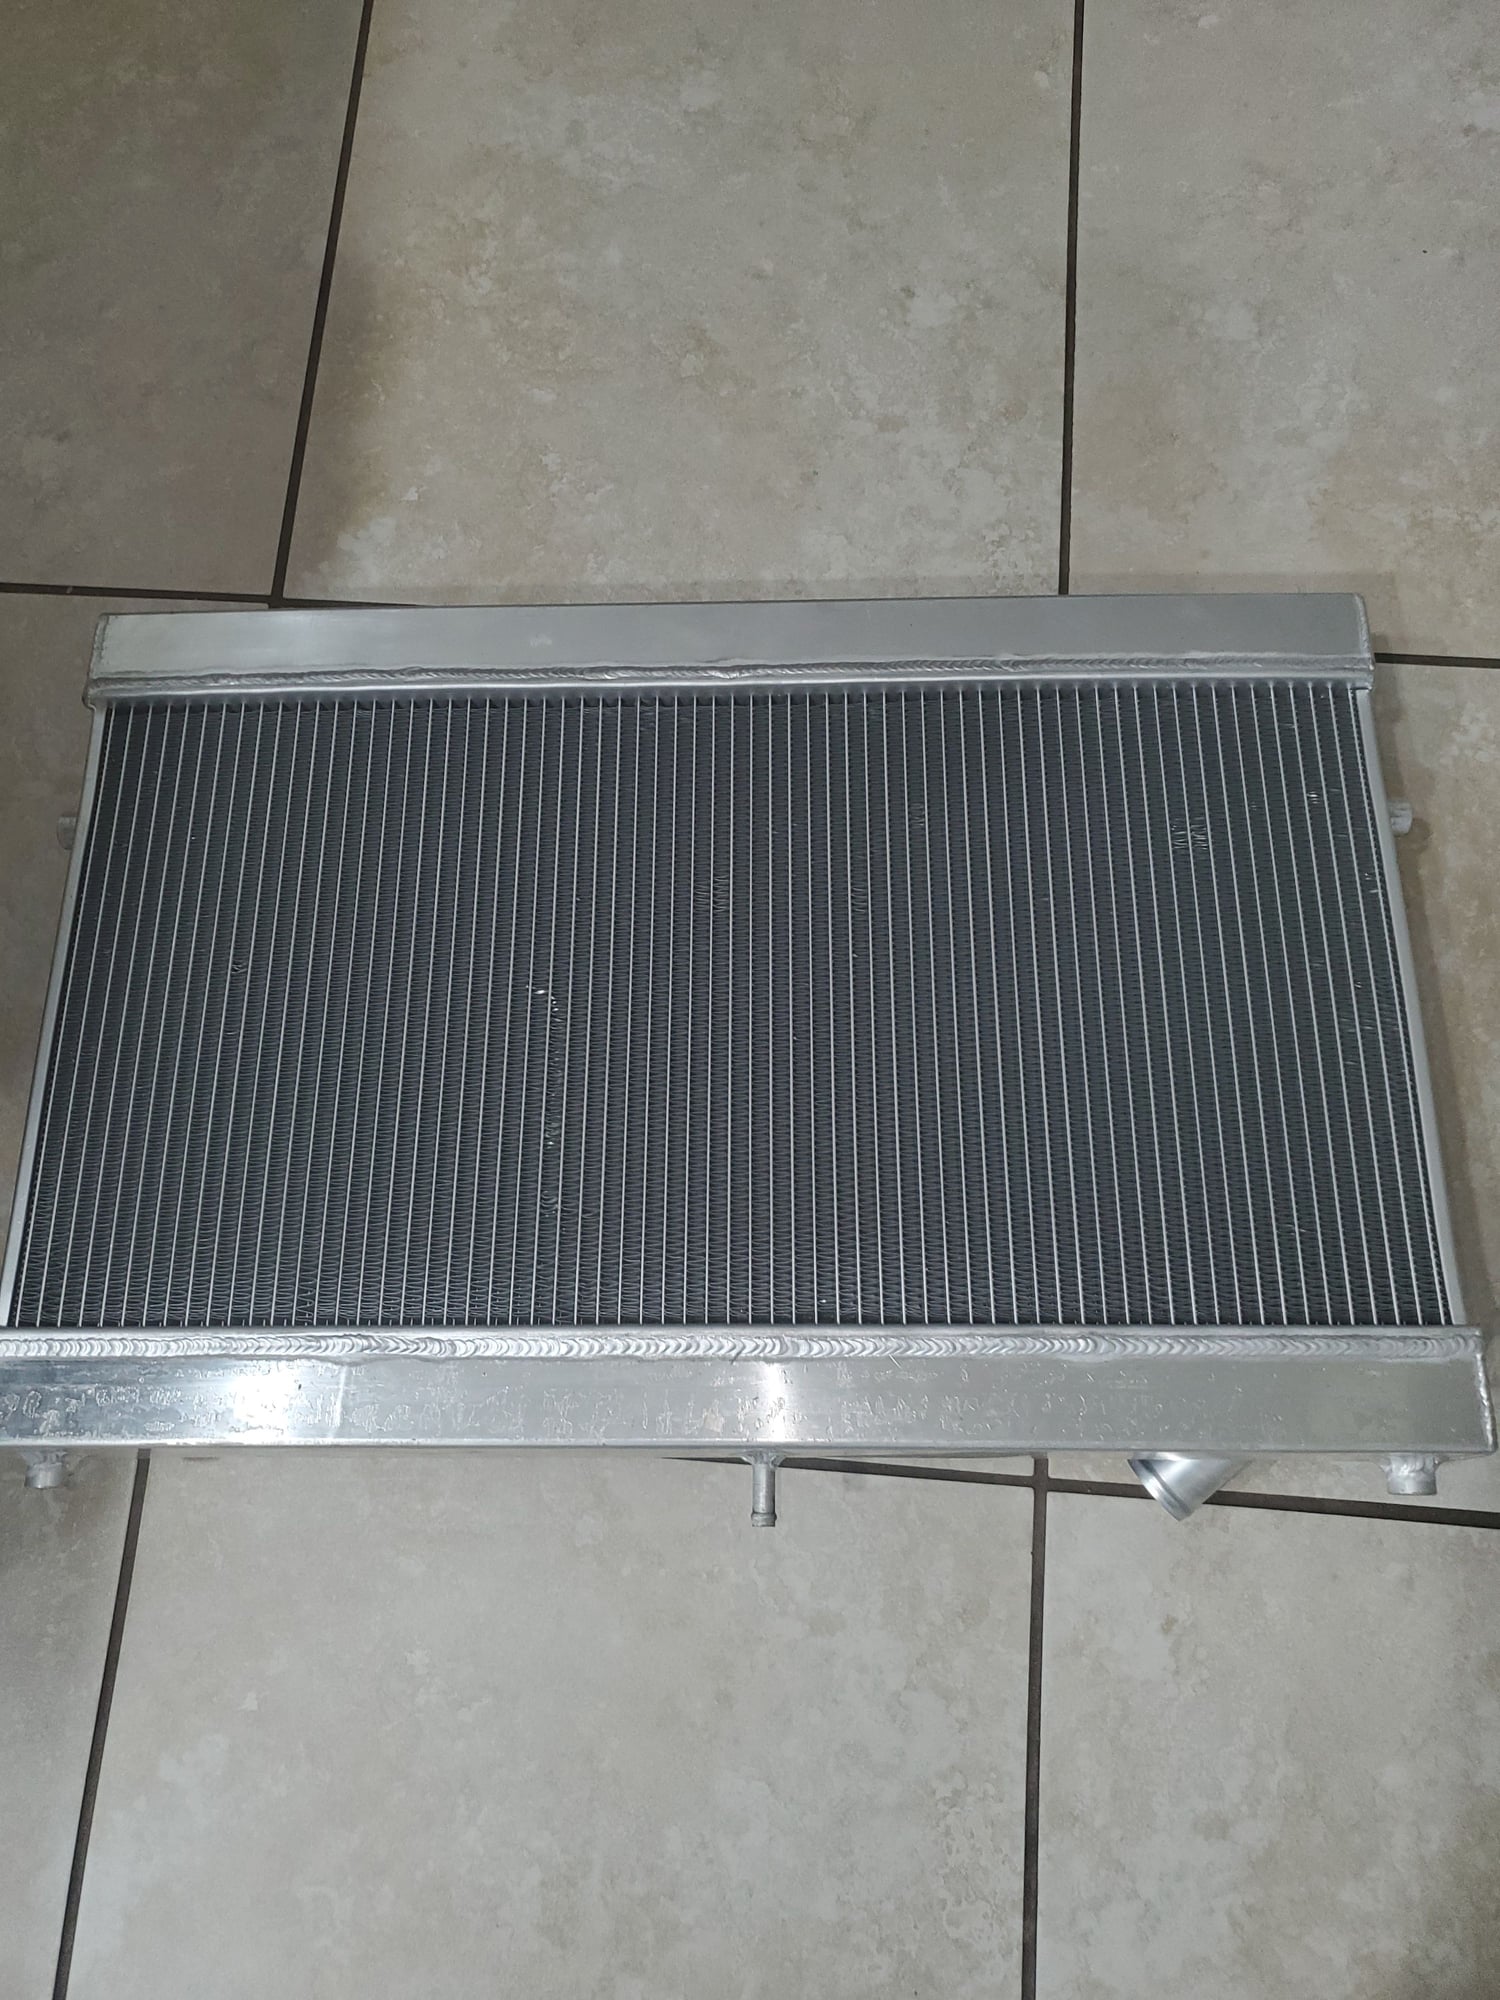 Accessories - Used CXRacing v mount radiator - Used - 1993 to 1995 Mazda RX-7 - St Augustine, FL 32086, United States